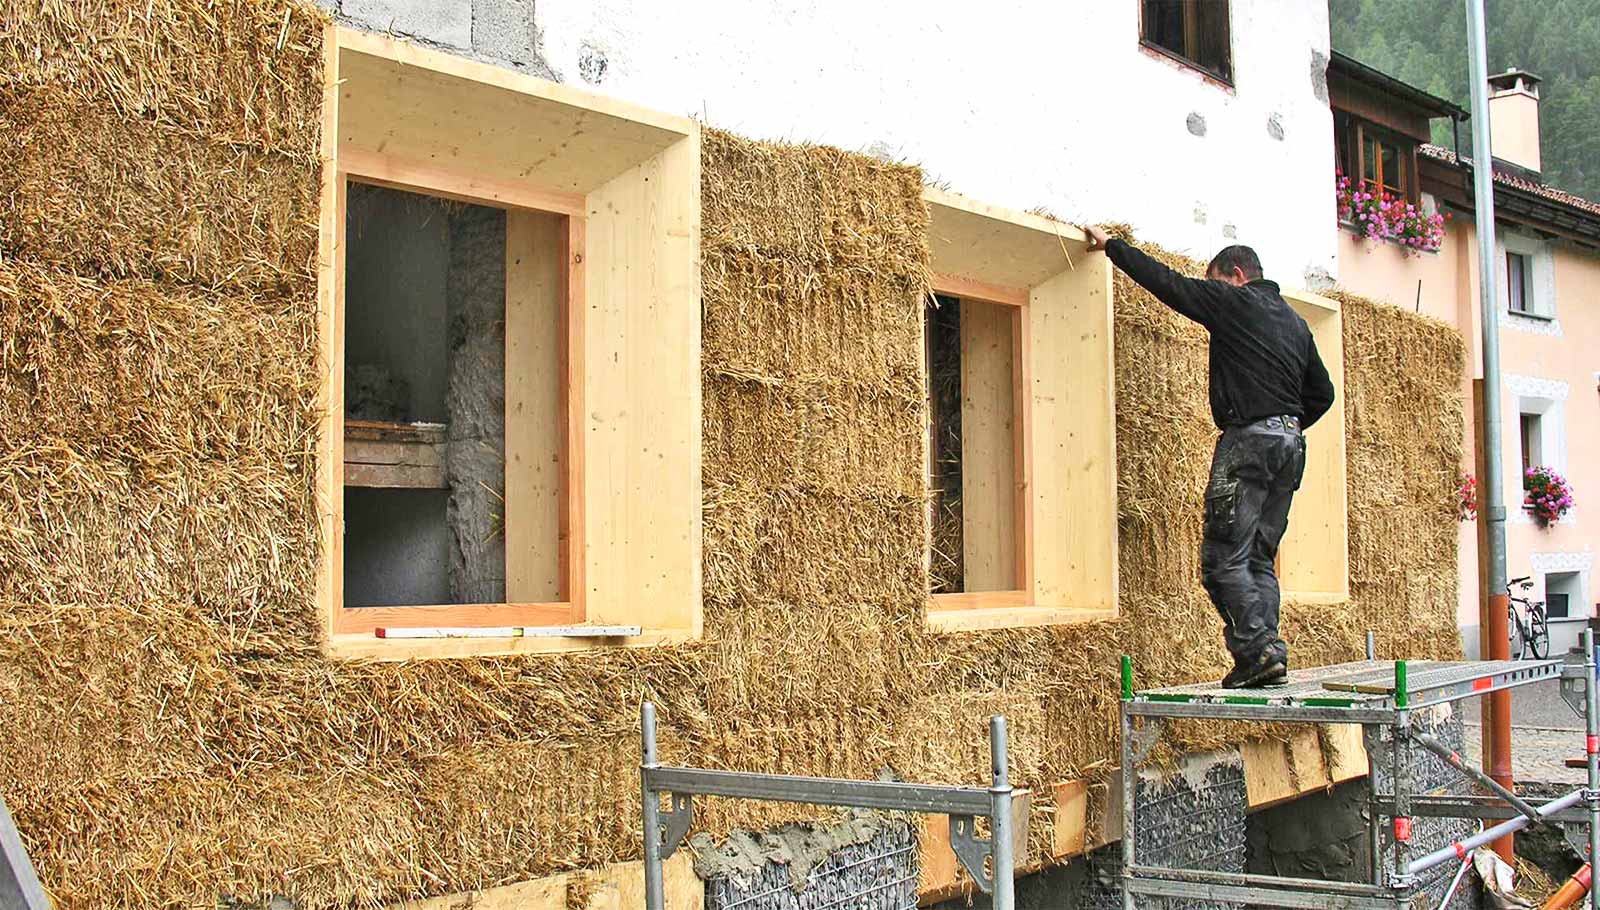 Building with straw and hemp could seriously cut emissions